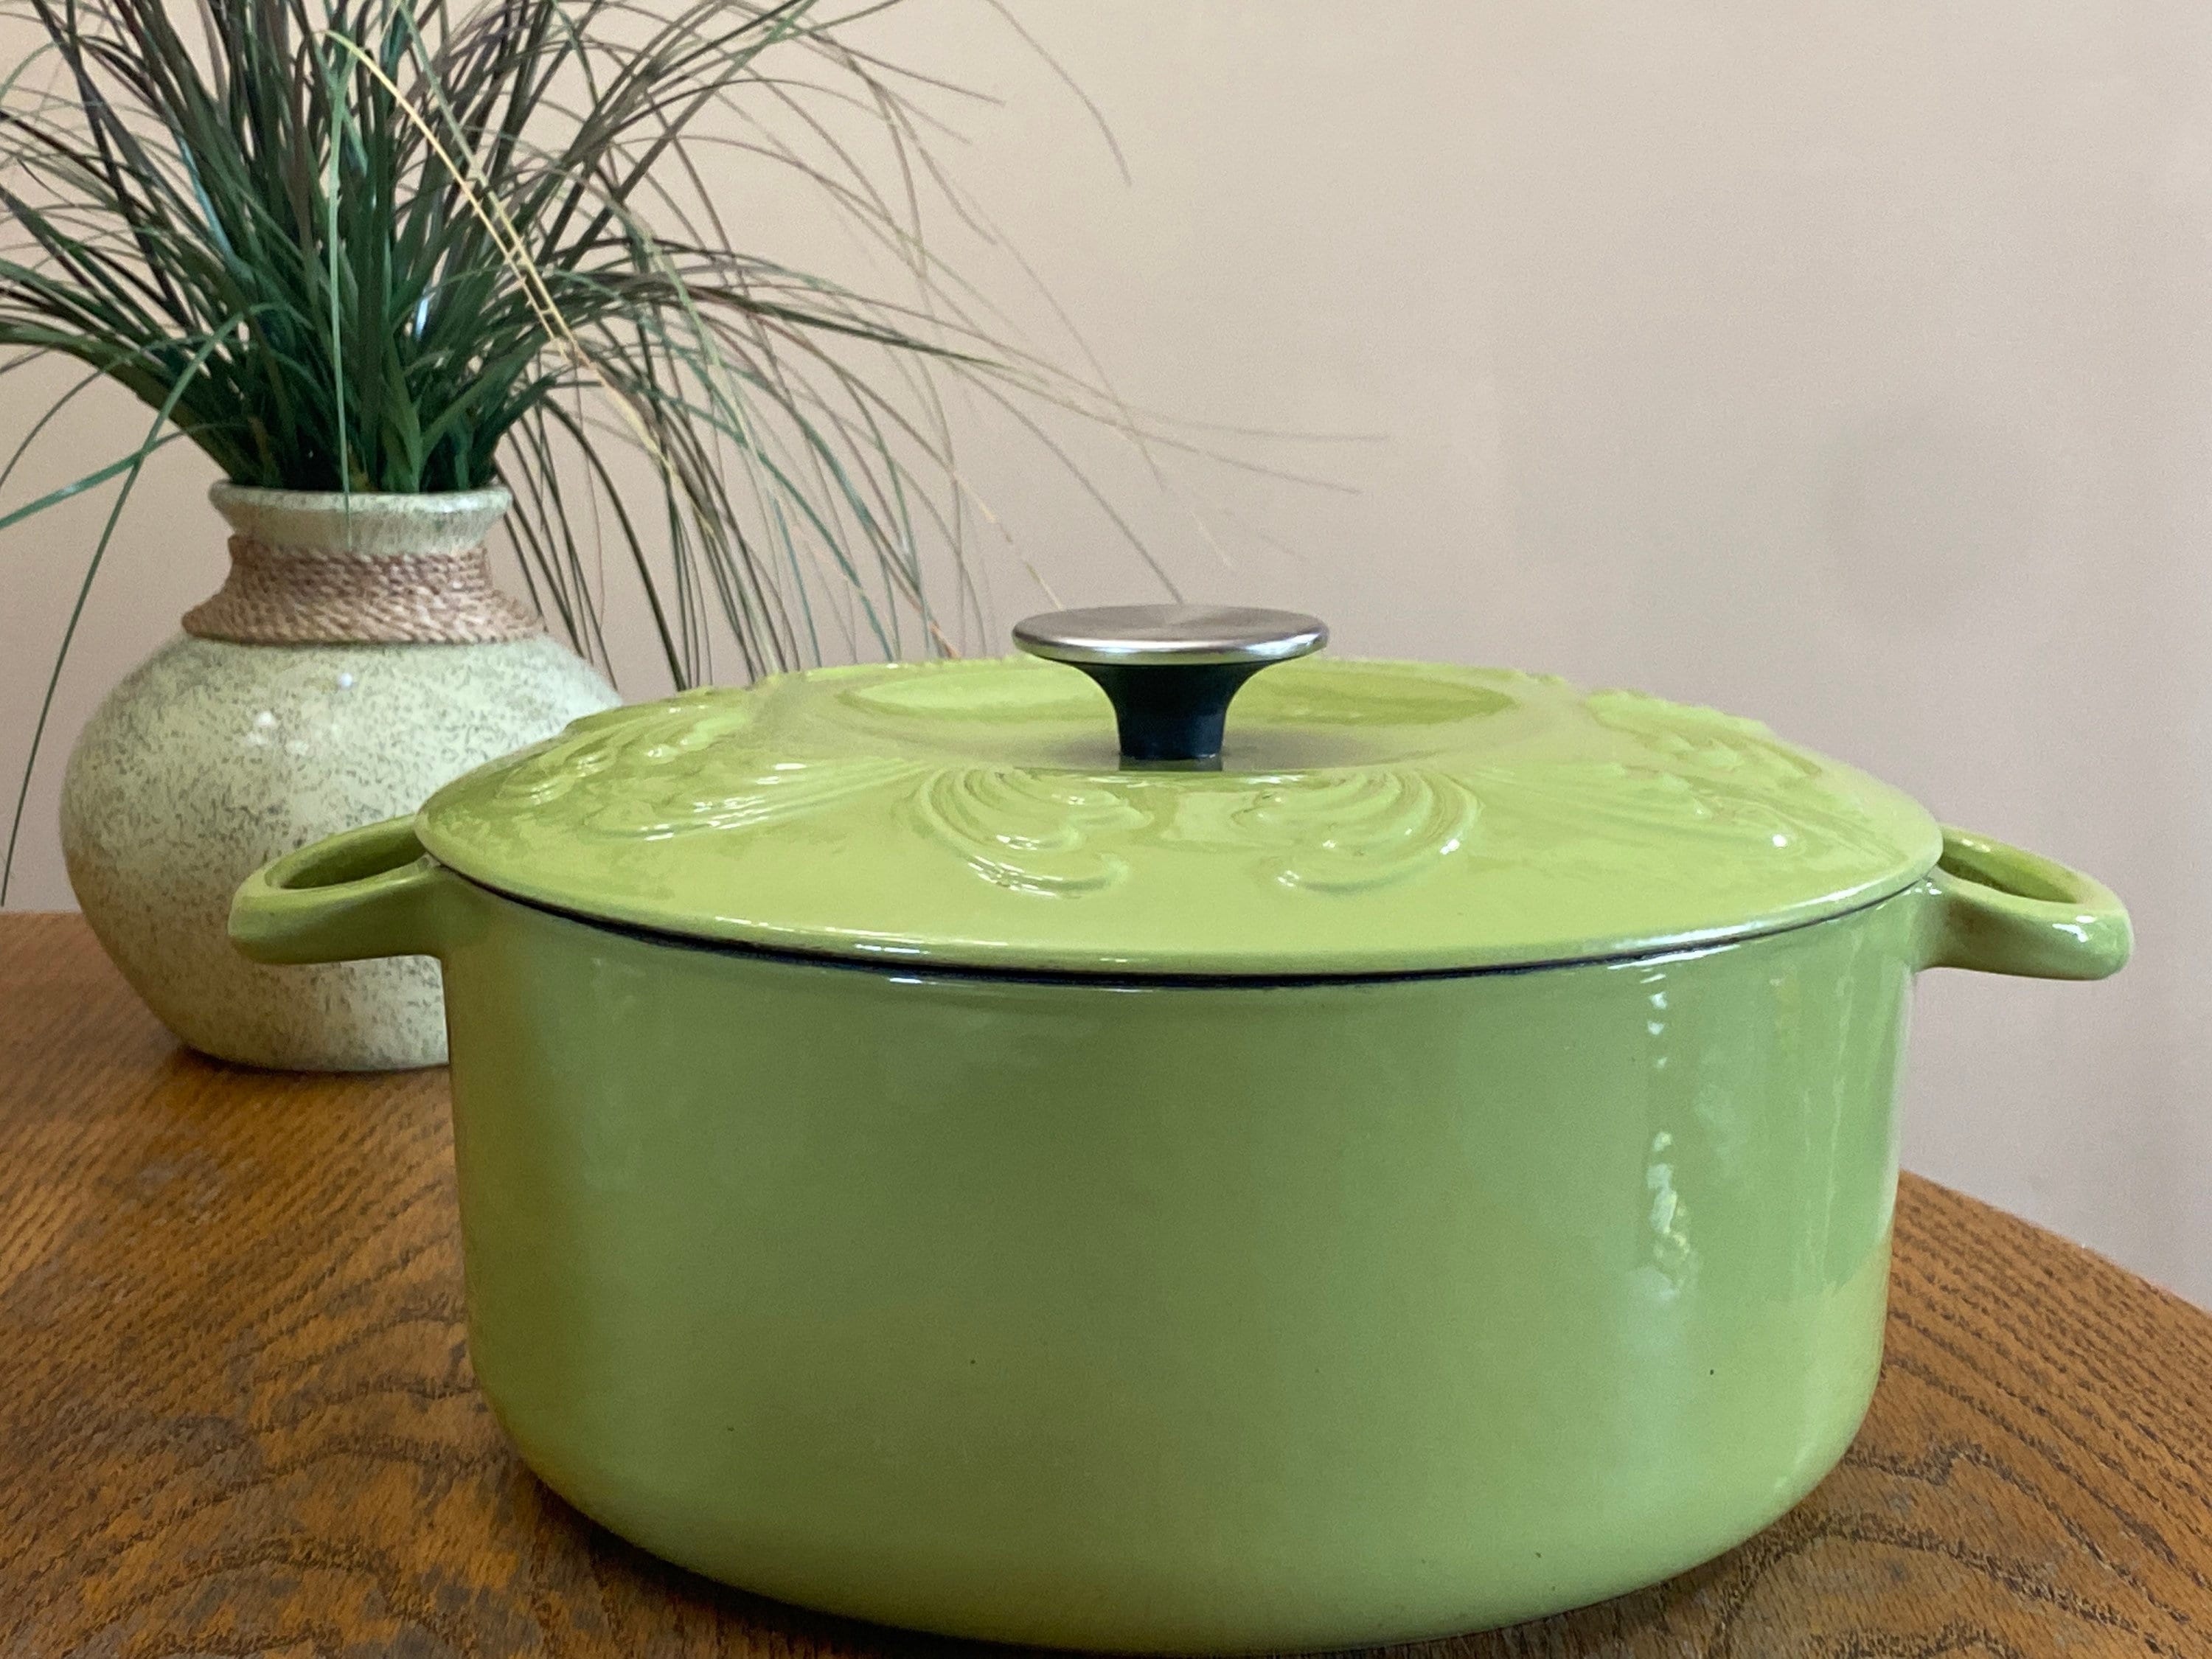 VINTAGE Small Green Cast Iron Enamelware Pot With Lid Dutch Oven ROASTER  Free DELIVERY, Free Postage, Green Kitchen Decoration Kitchen Gift 